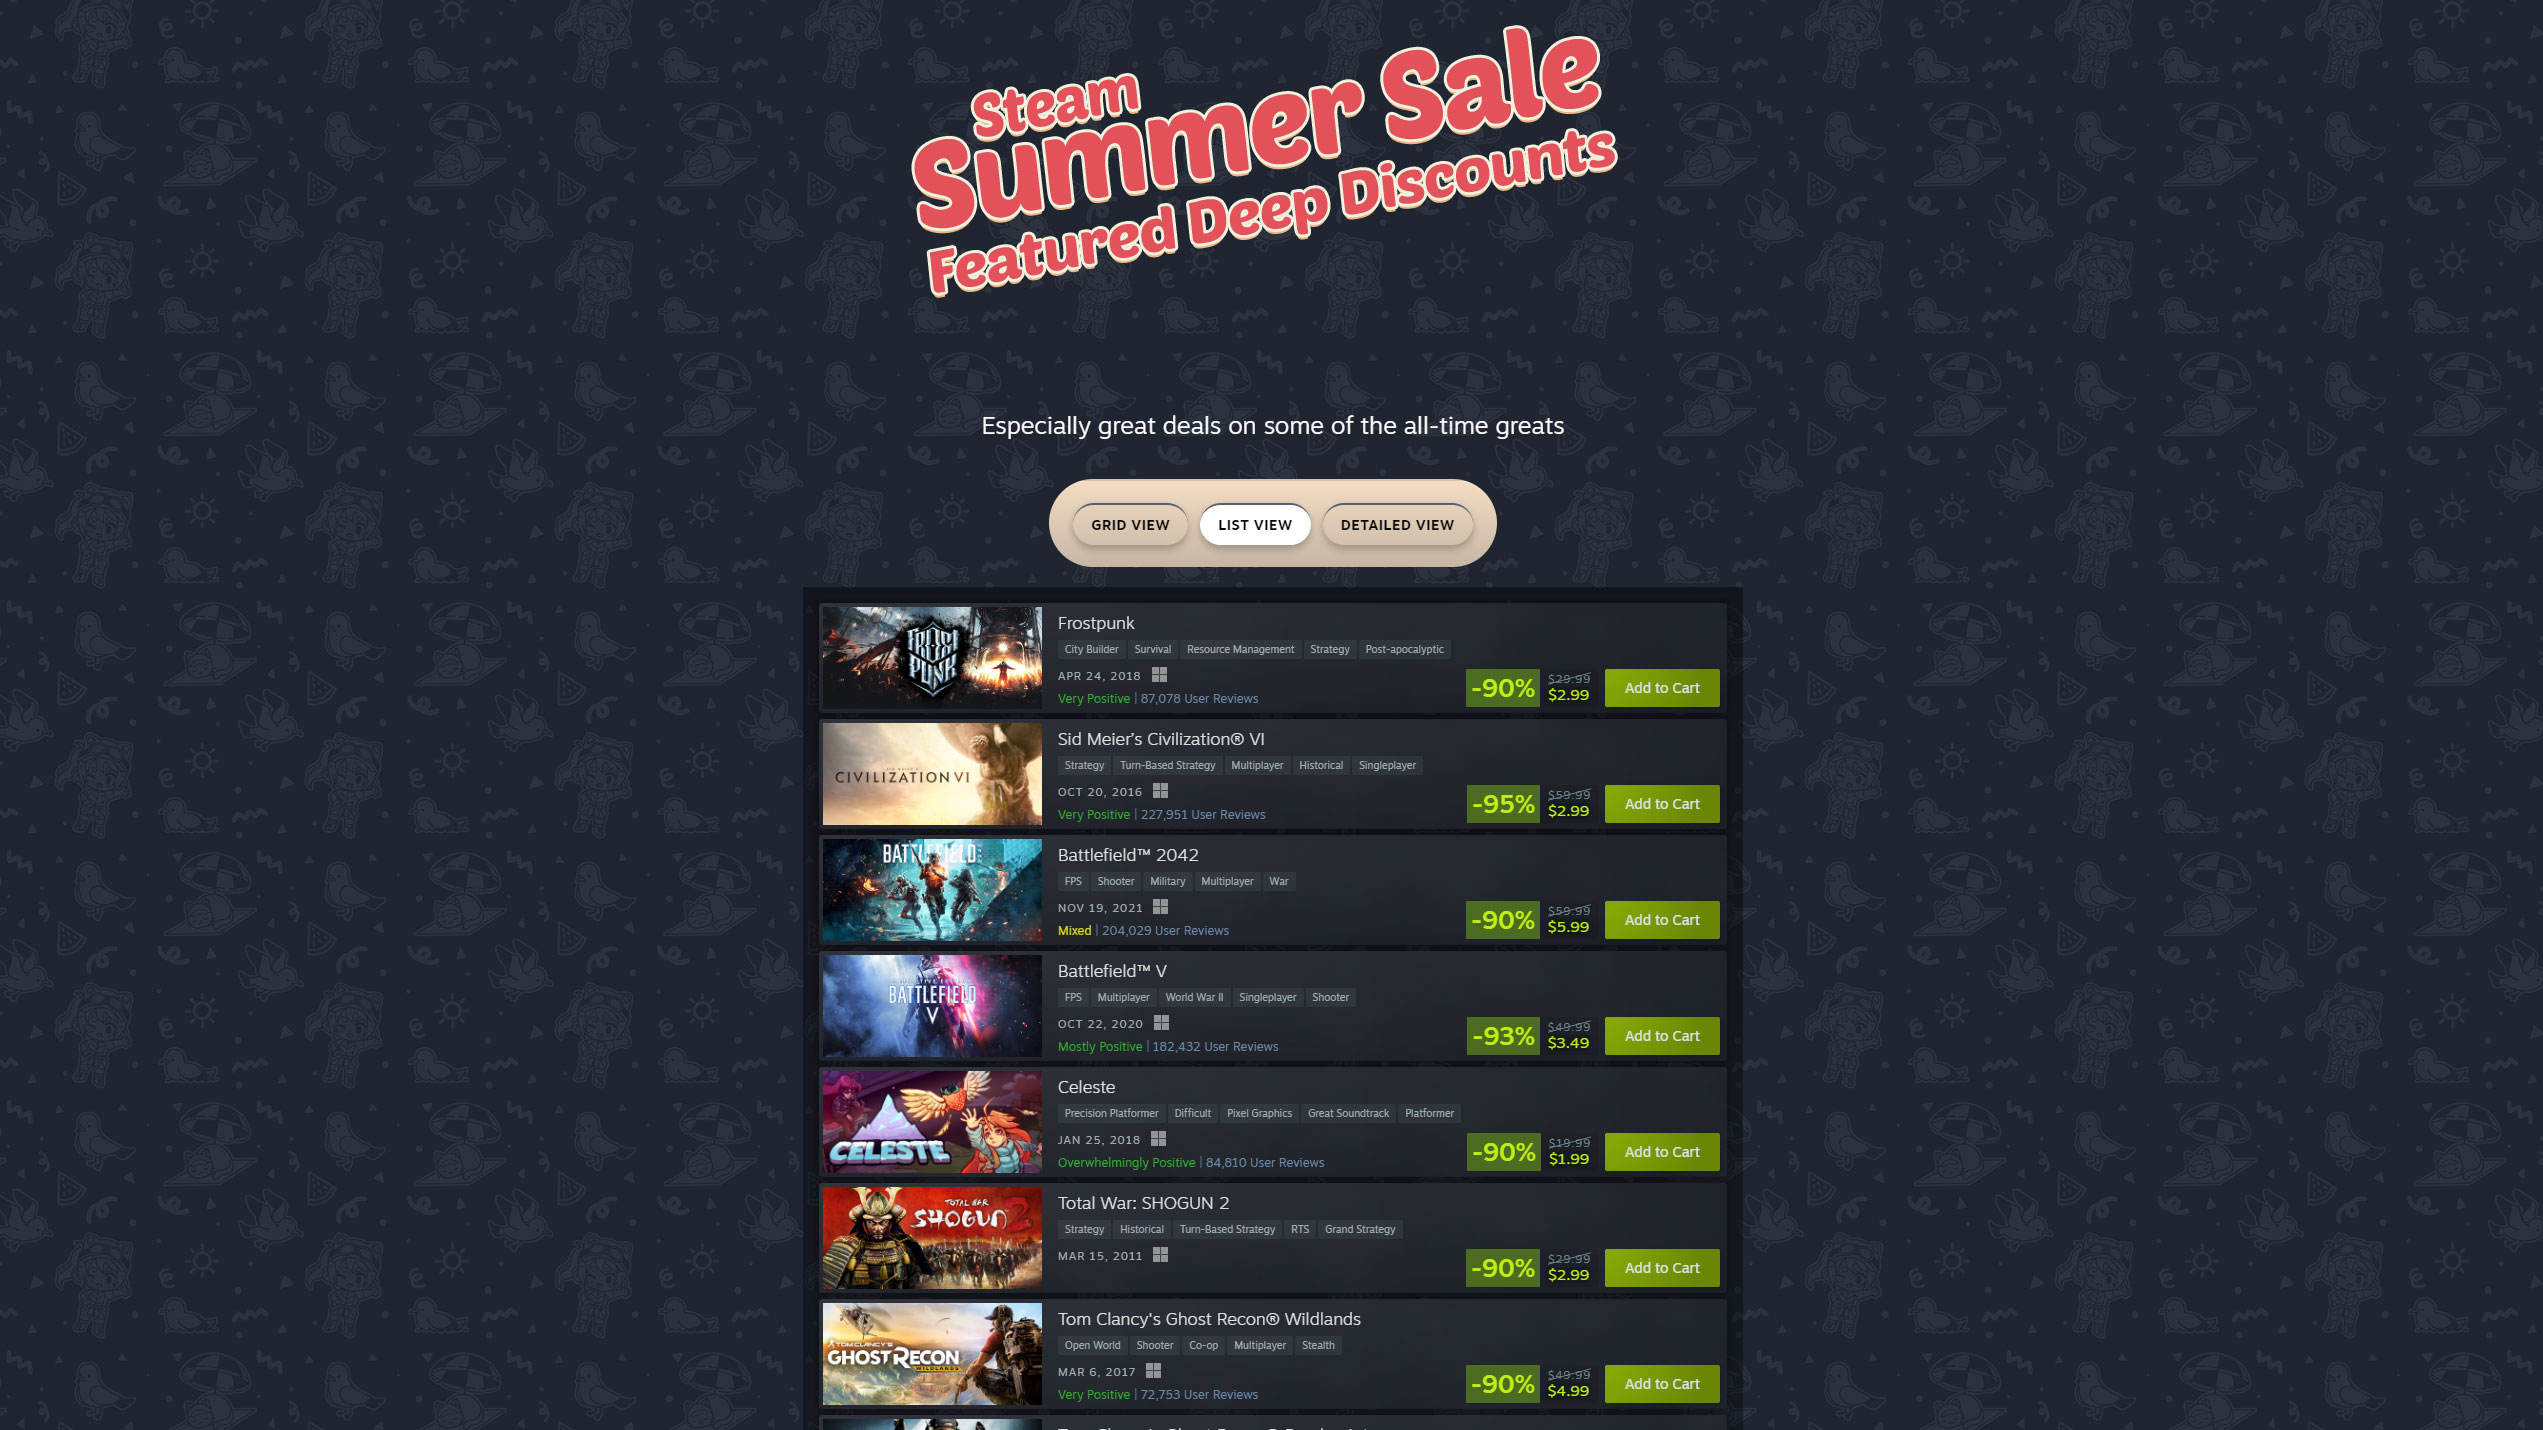 The Steam Summer Sale Featured Deep Discounts have up to 95% off savings